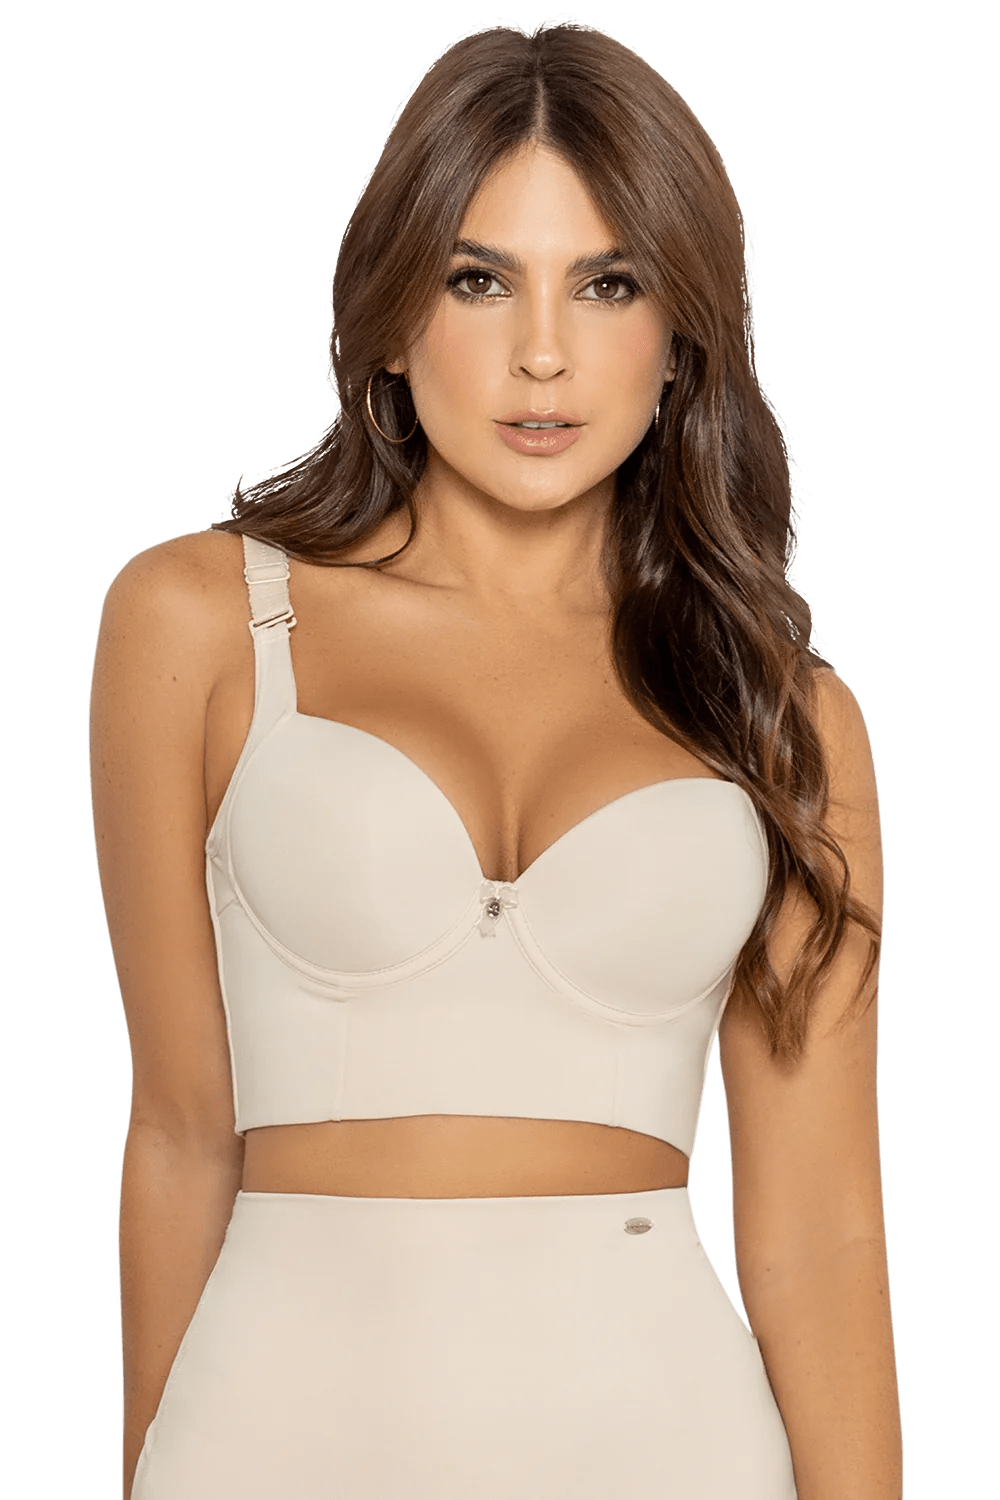 Ily Clothing bras Max Back Support Bra